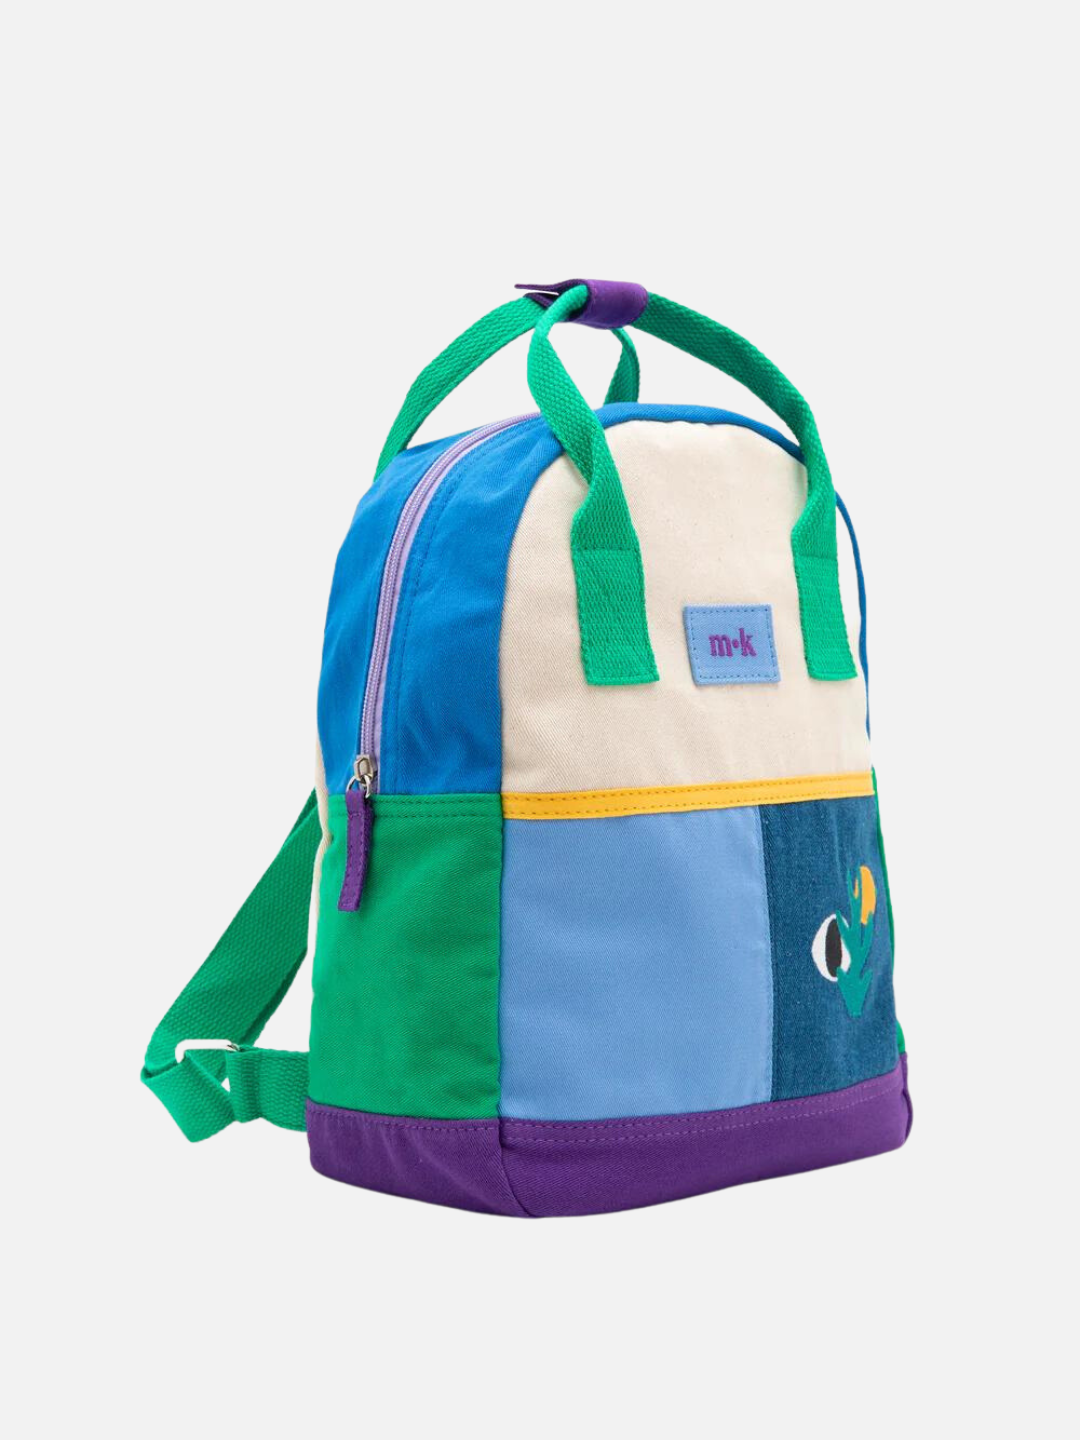 Side view of a colorblock backpack with green handles, straps and side, purple base, blue top, with two blue patches at the front under a cream top, one with images of an eye, a sun and a plant